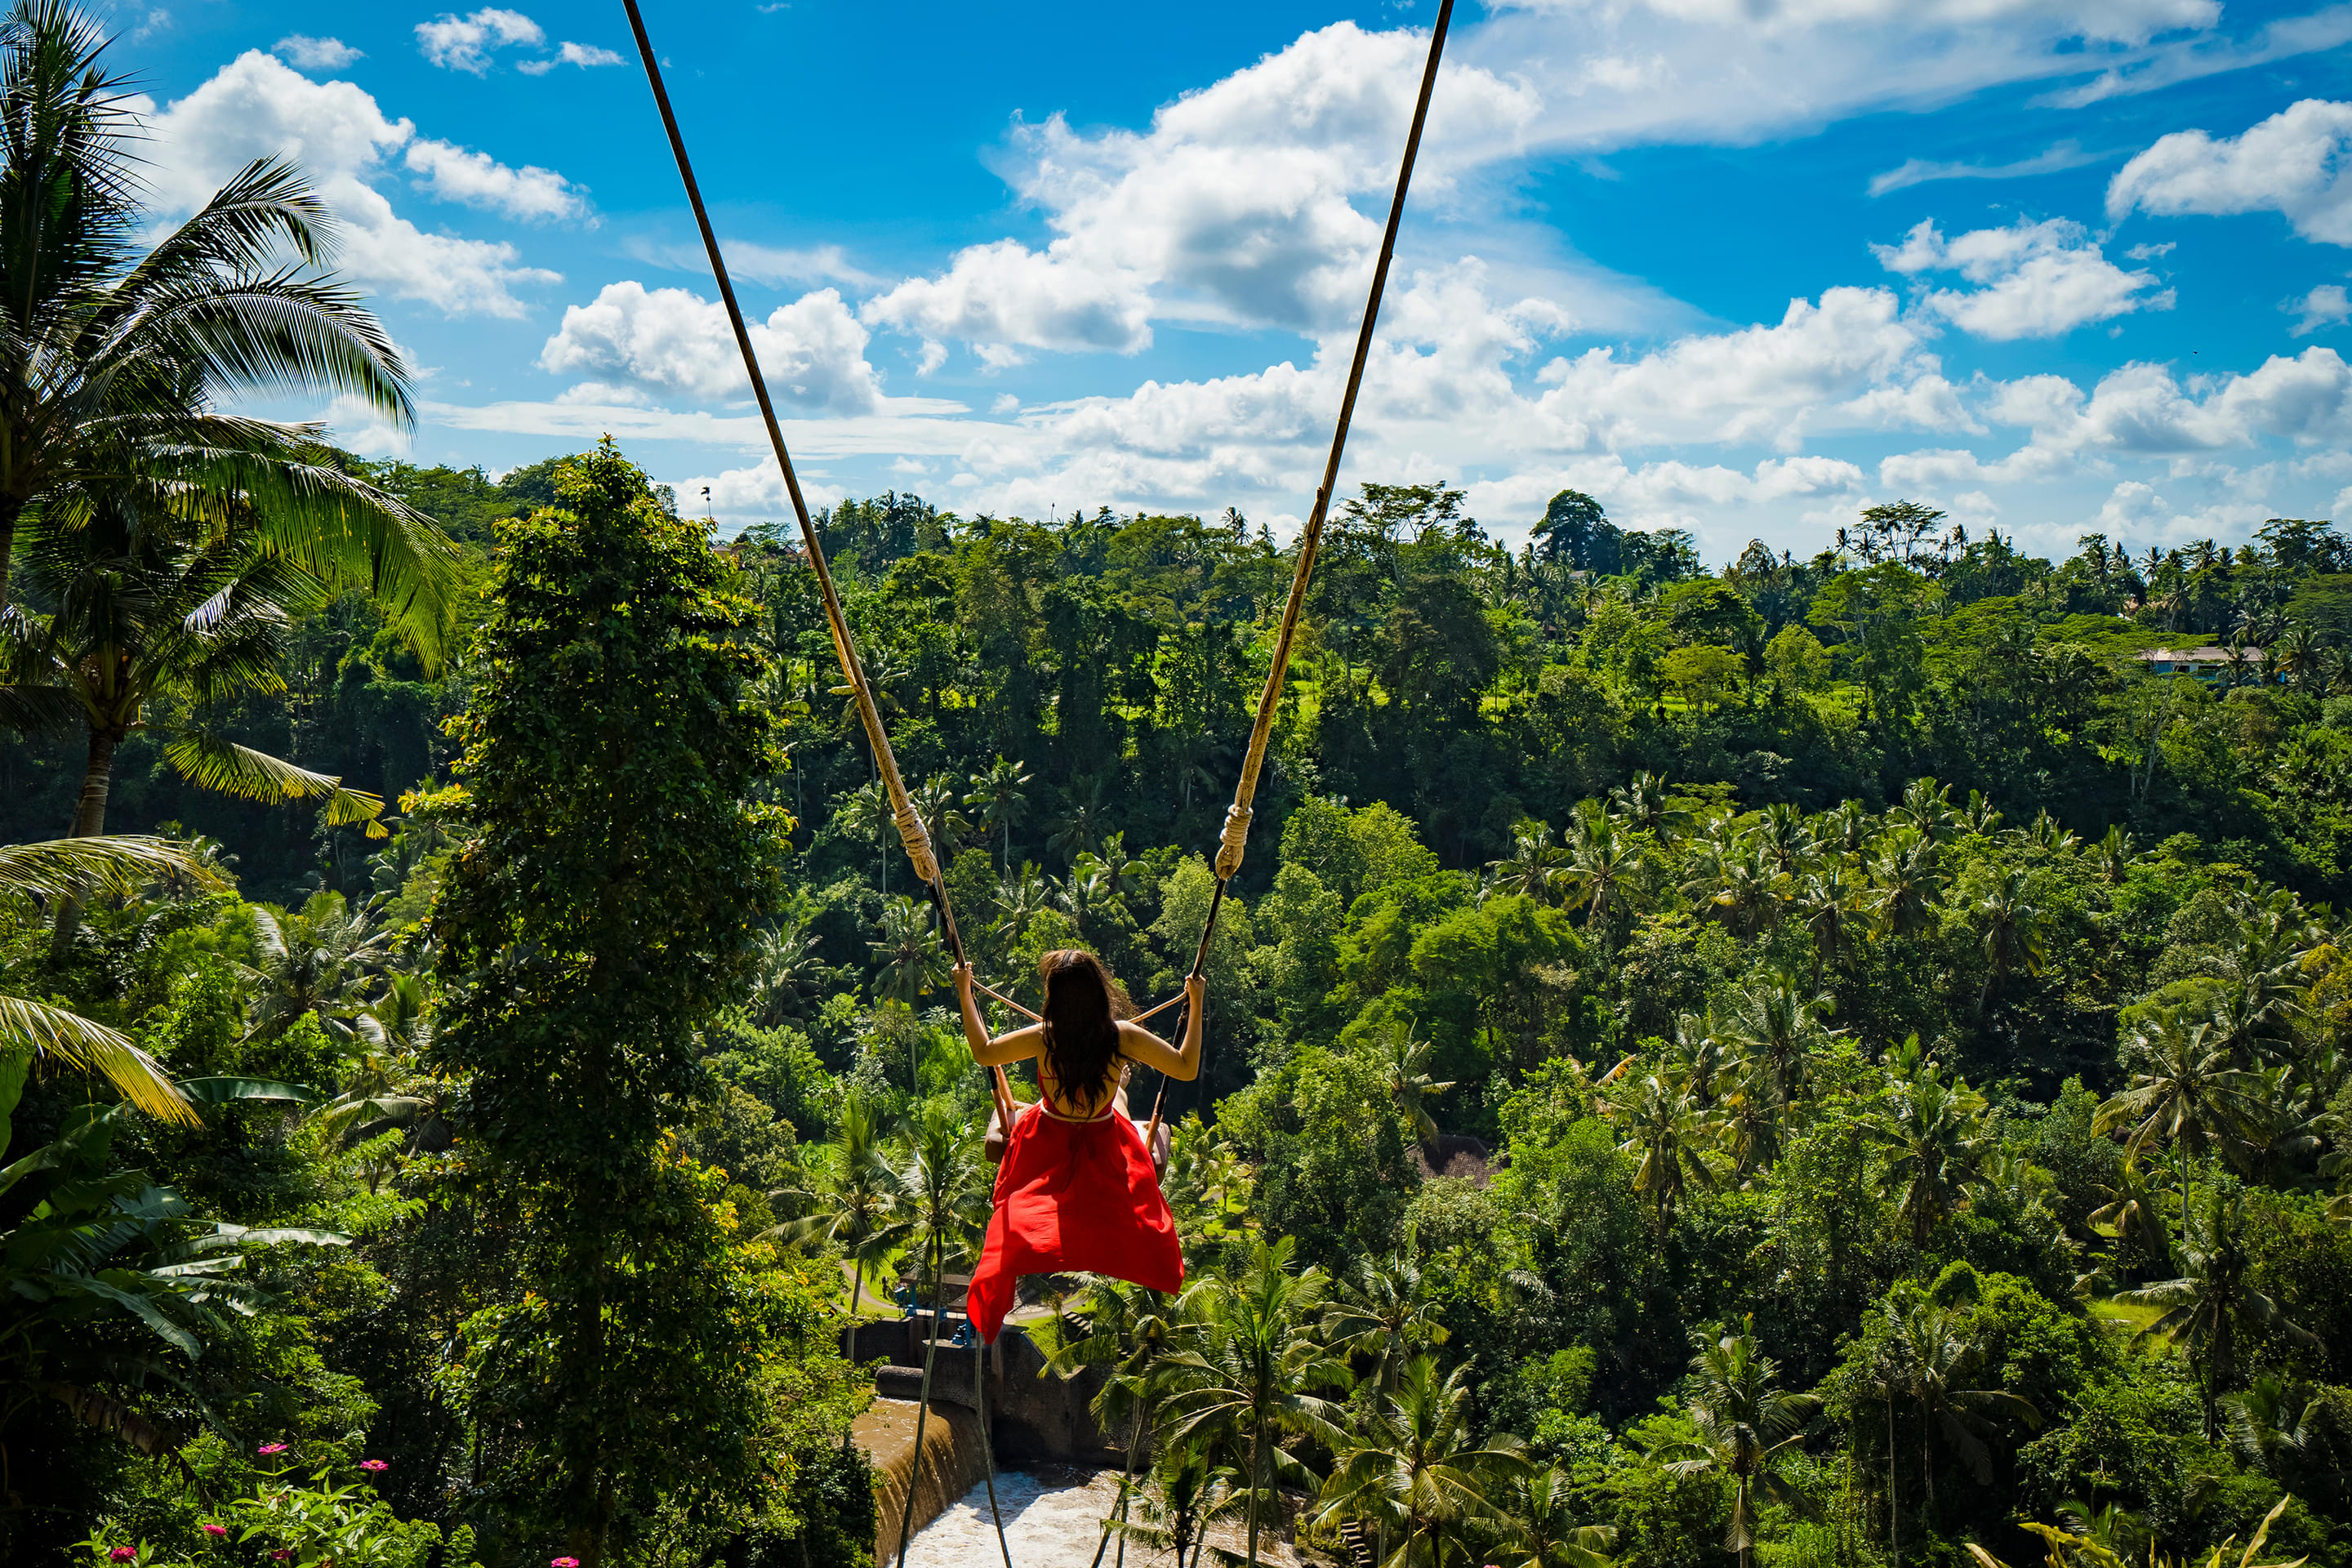 Bali Swing Overview